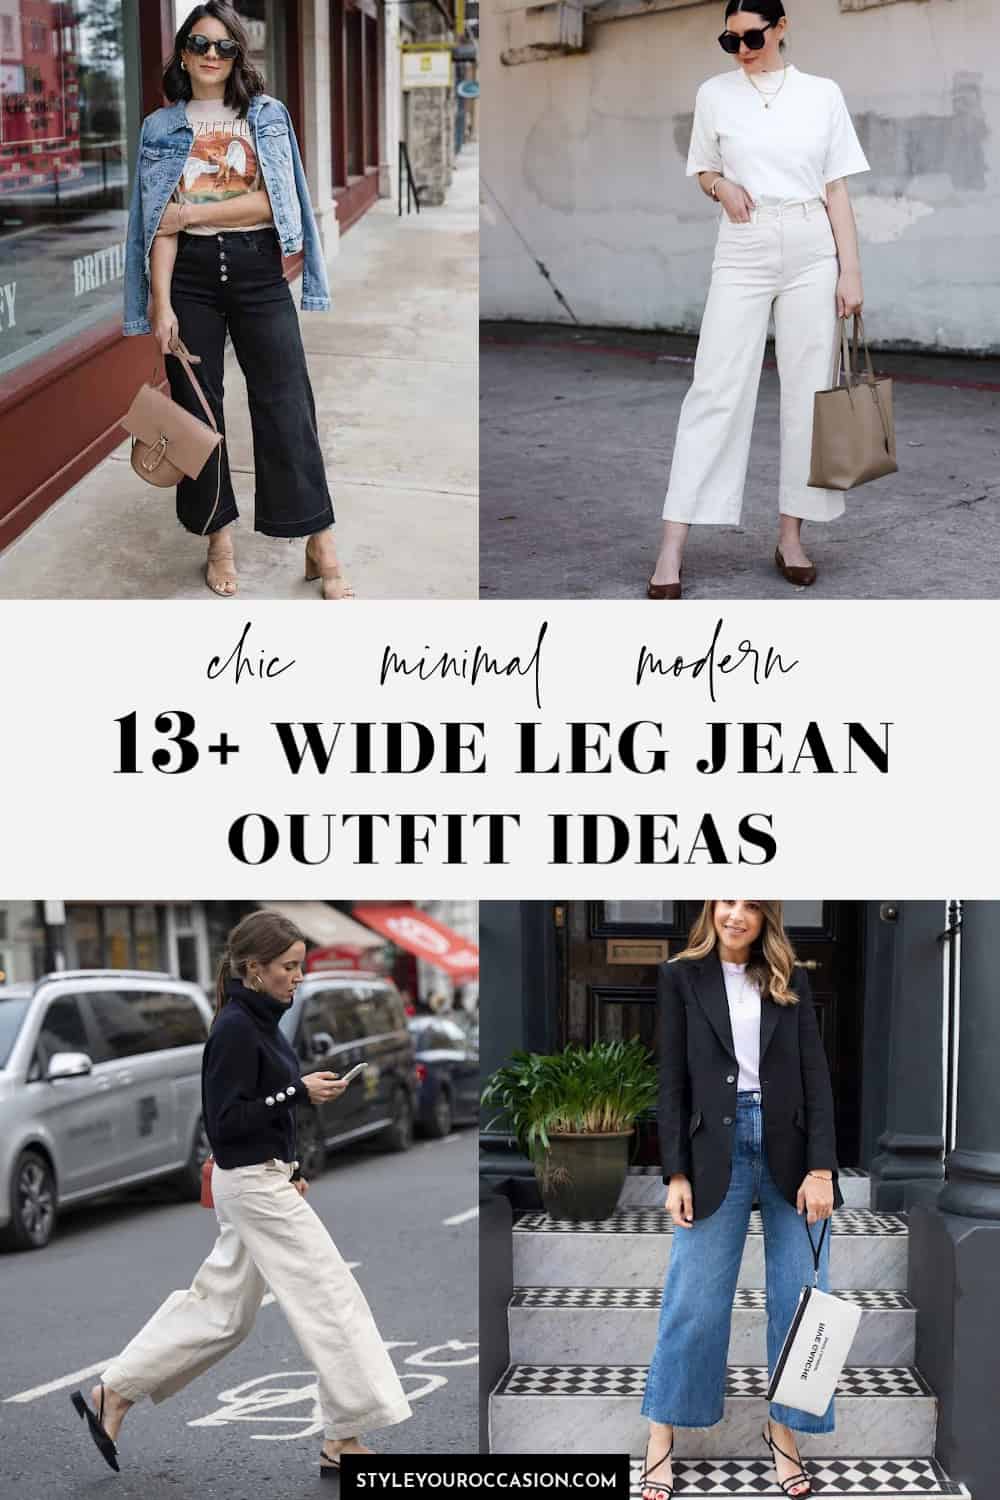 collage of images of women in chic outfits with wide leg jeans